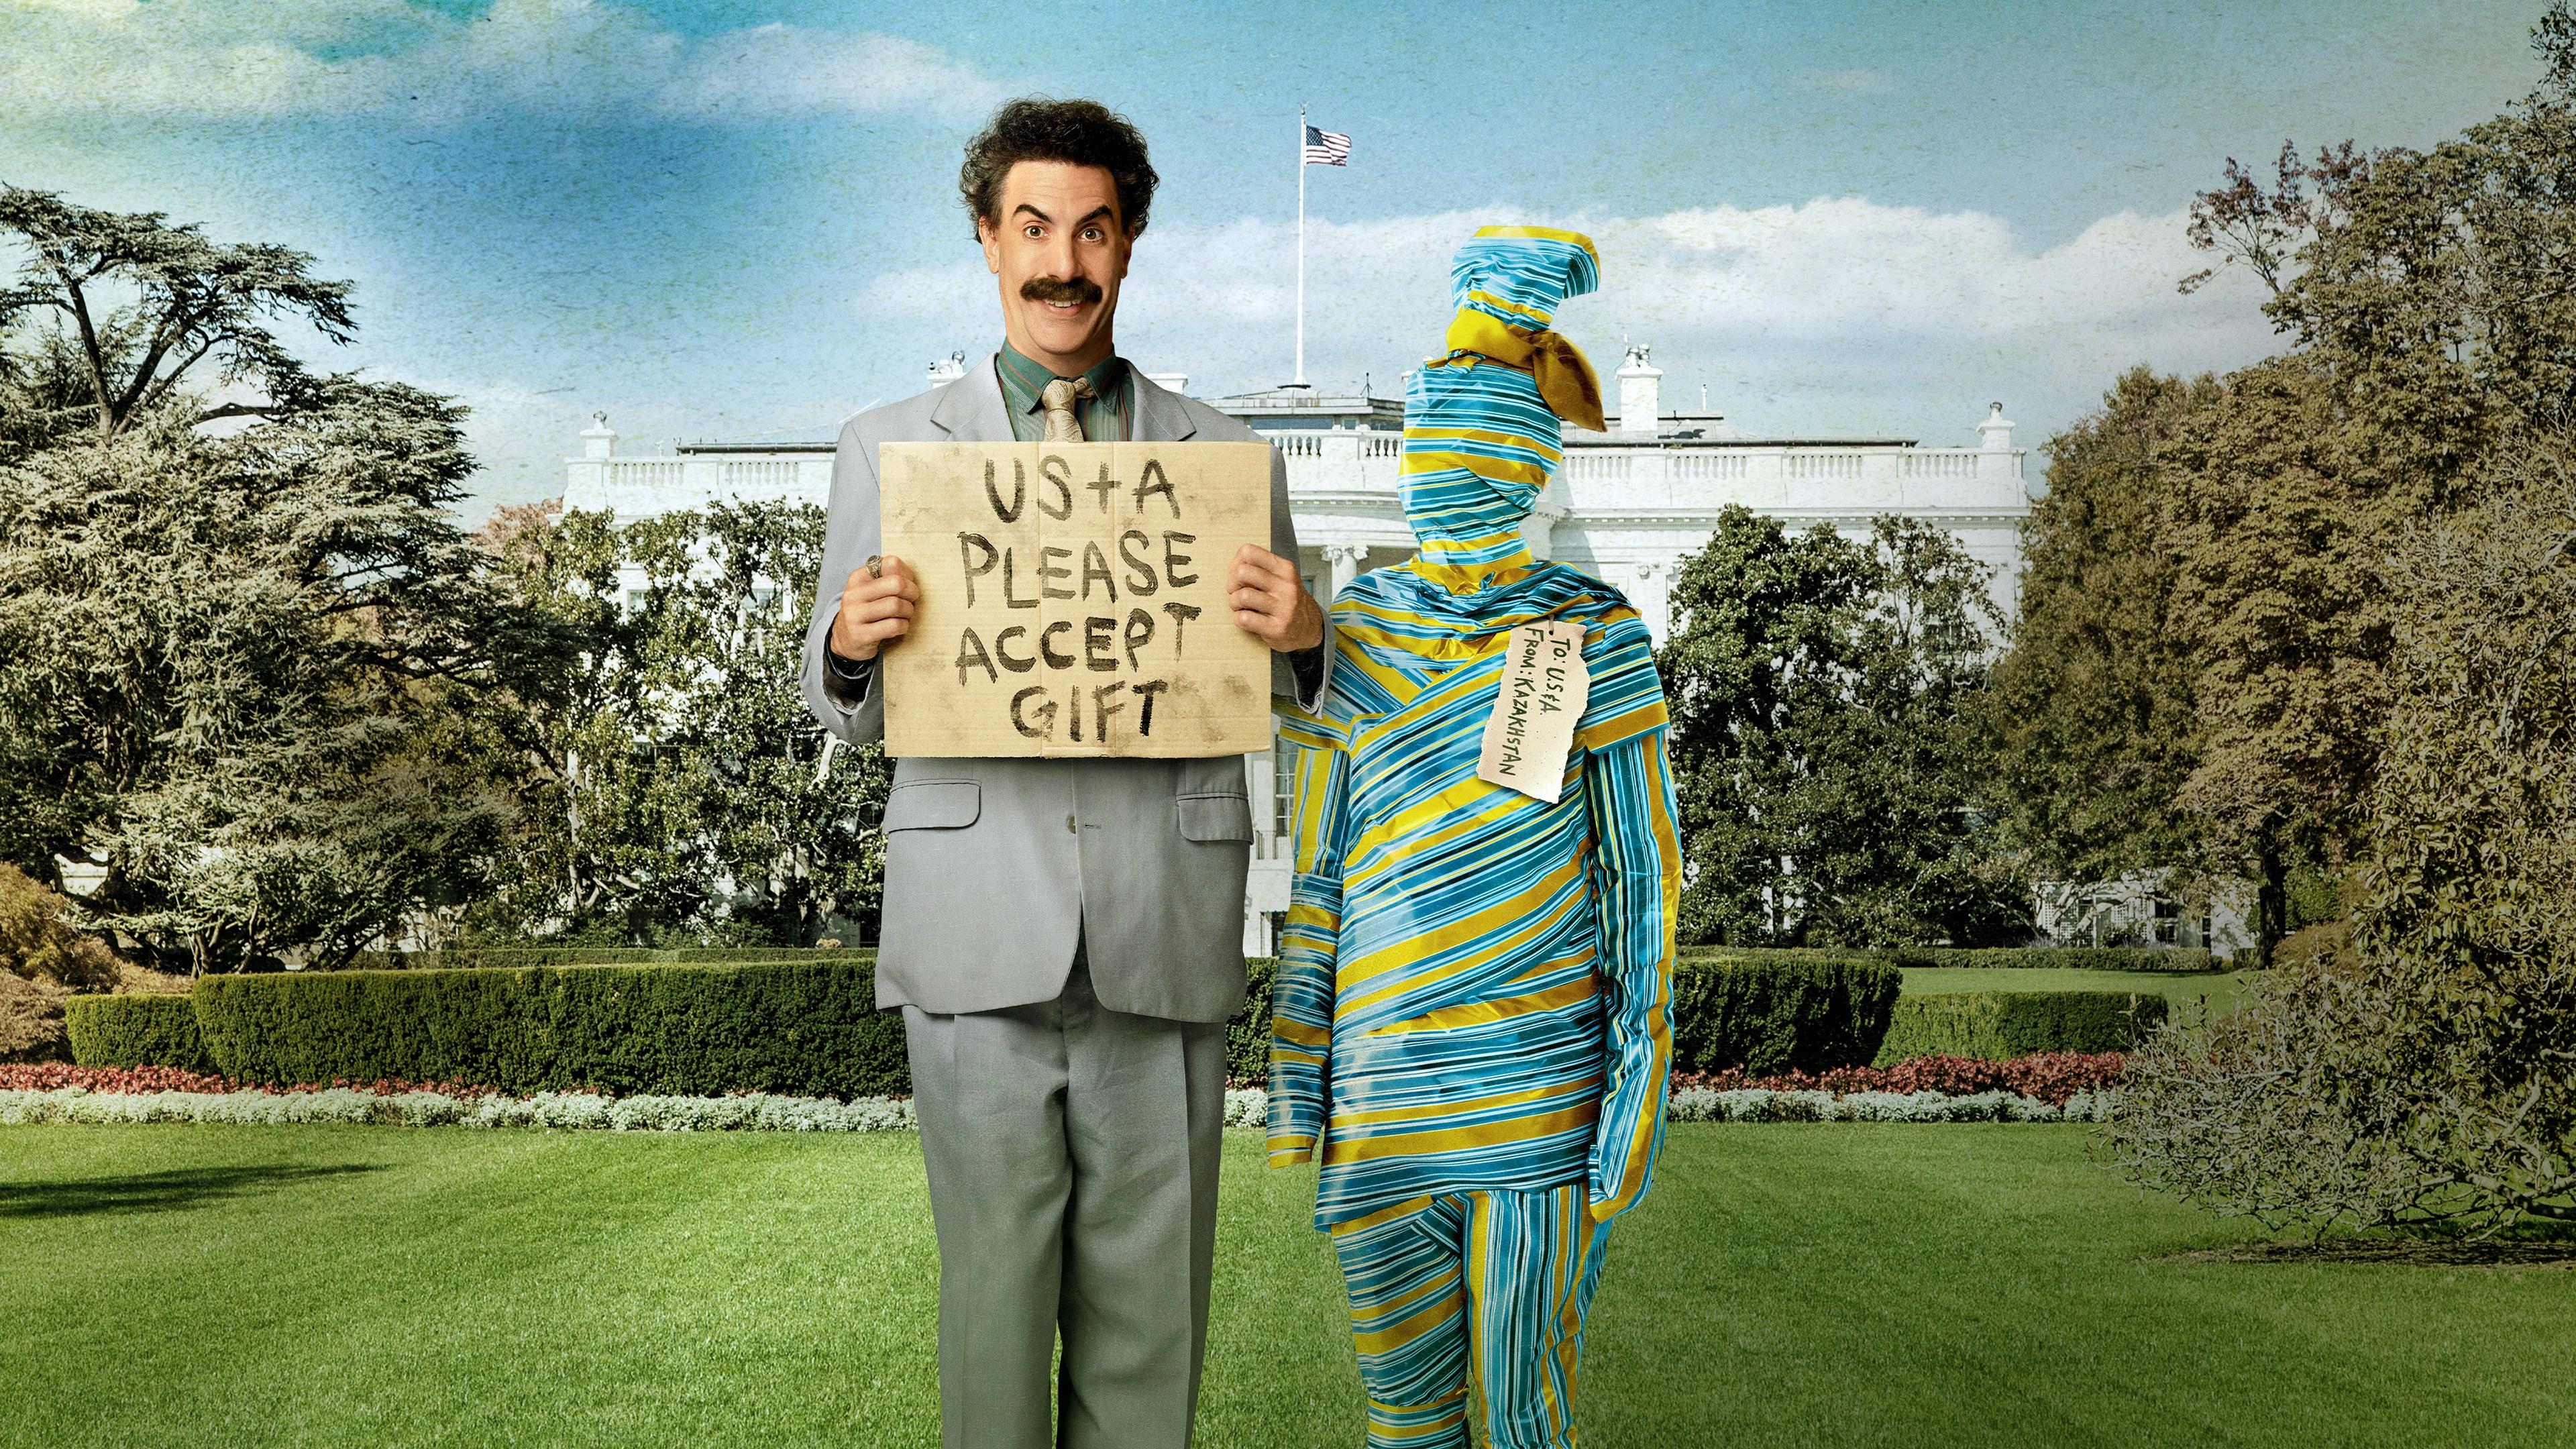 Borat Subsequent Moviefilm - Amazon Prime Video Movie - Where To Watch